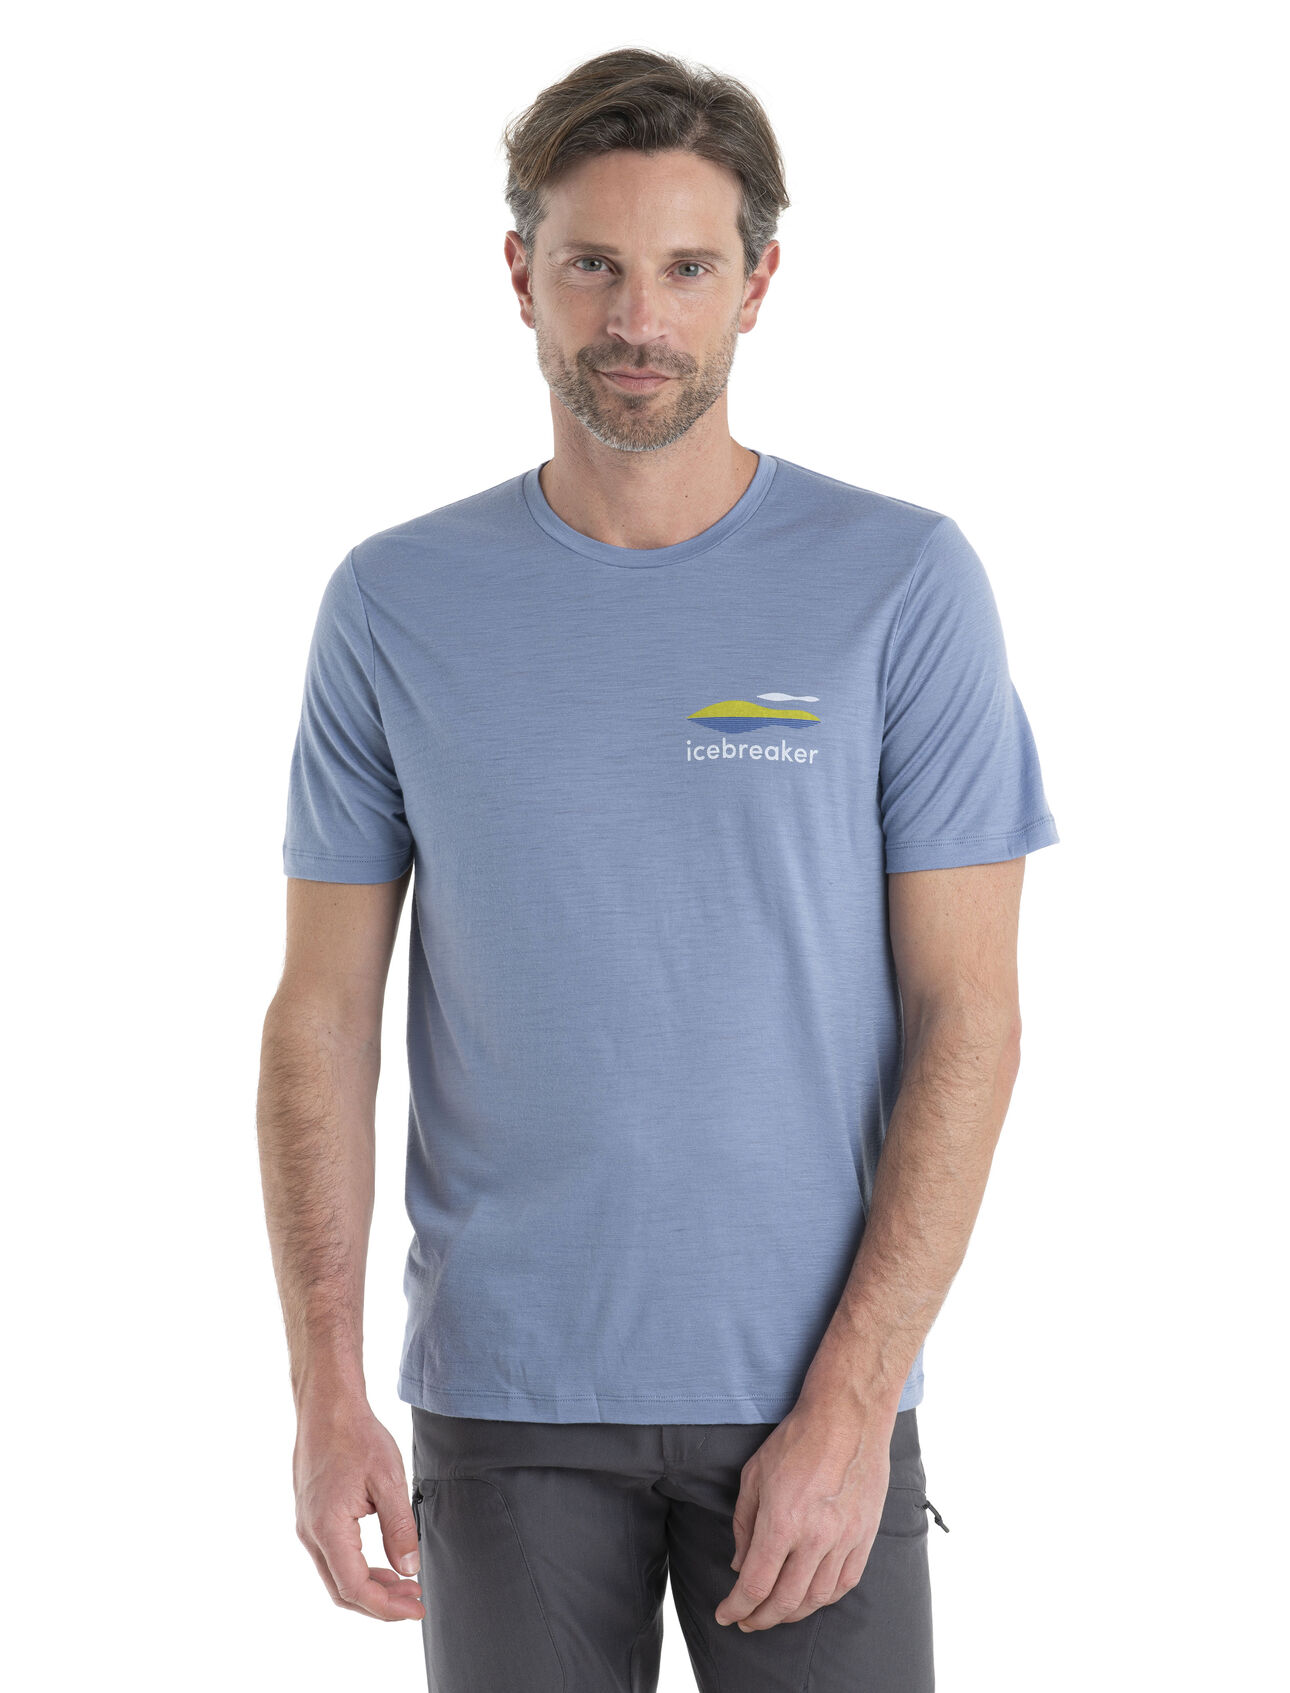 Mens Merino 150 Tech Lite II Short Sleeve T-Shirt Aotearoa Our versatile tech tee that provides comfort, breathability and odour-resistance for any adventure you can think of, the 150 Tech Lite II Short Sleeve Tee Aotearoa features 100% merino for all-natural performance. The tee's original artwork features a logo graphic that pays homage to the Maori name for New Zealand—Aotearoa—which means Land of the Long White Cloud.